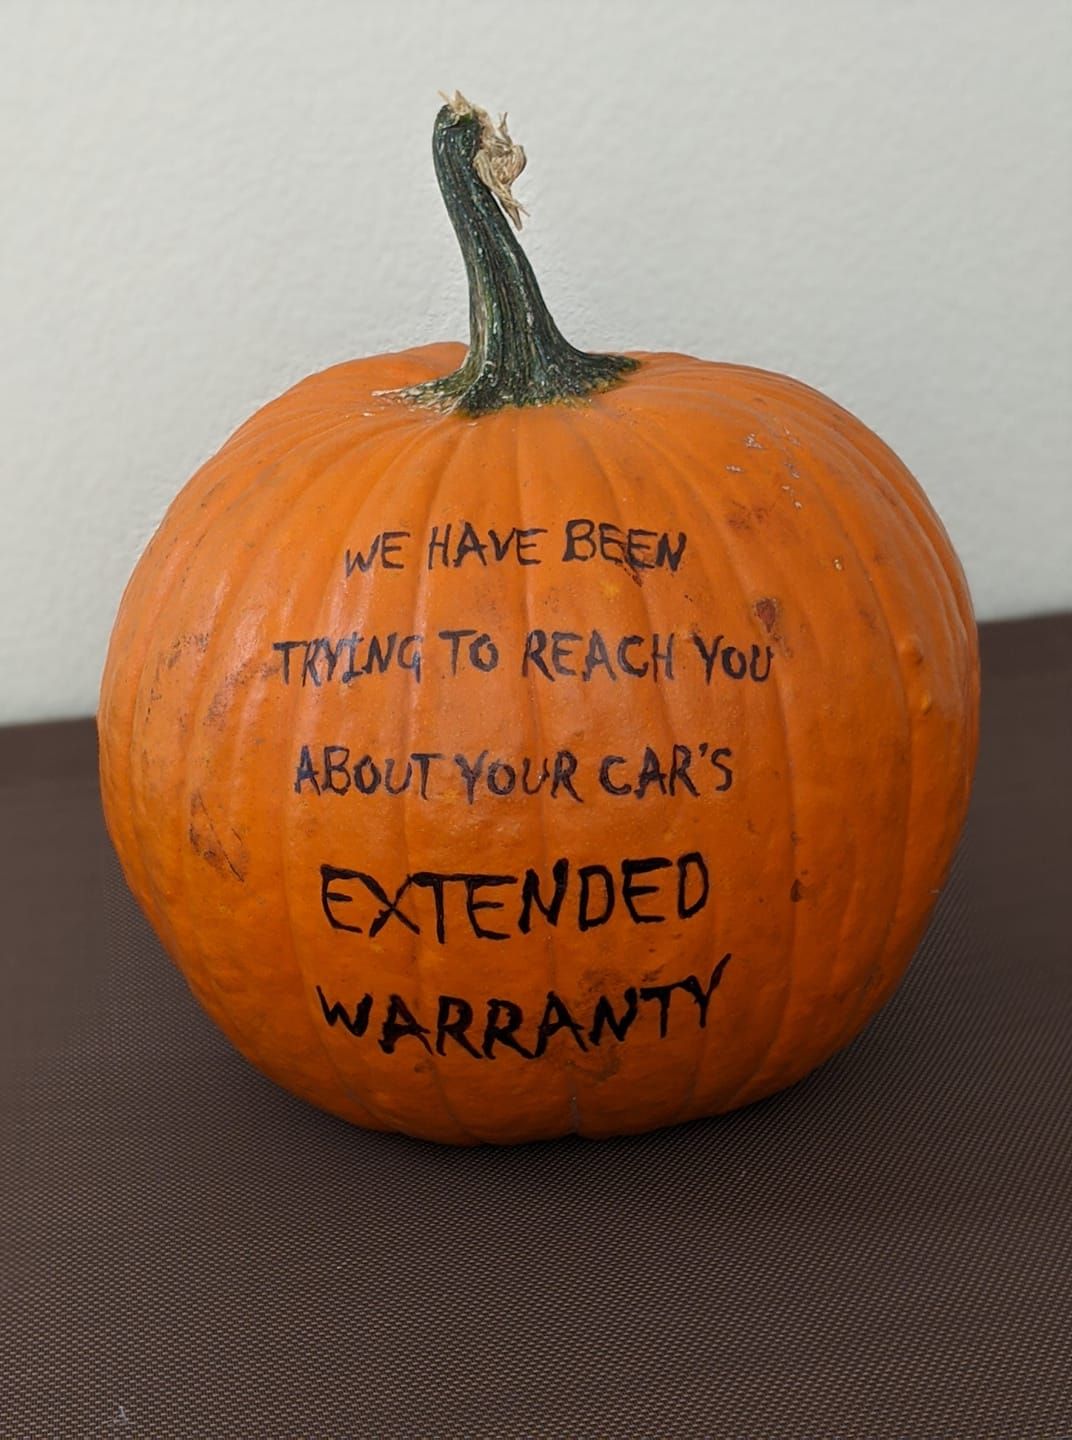 Just finished decorating our annual scary pumpkin